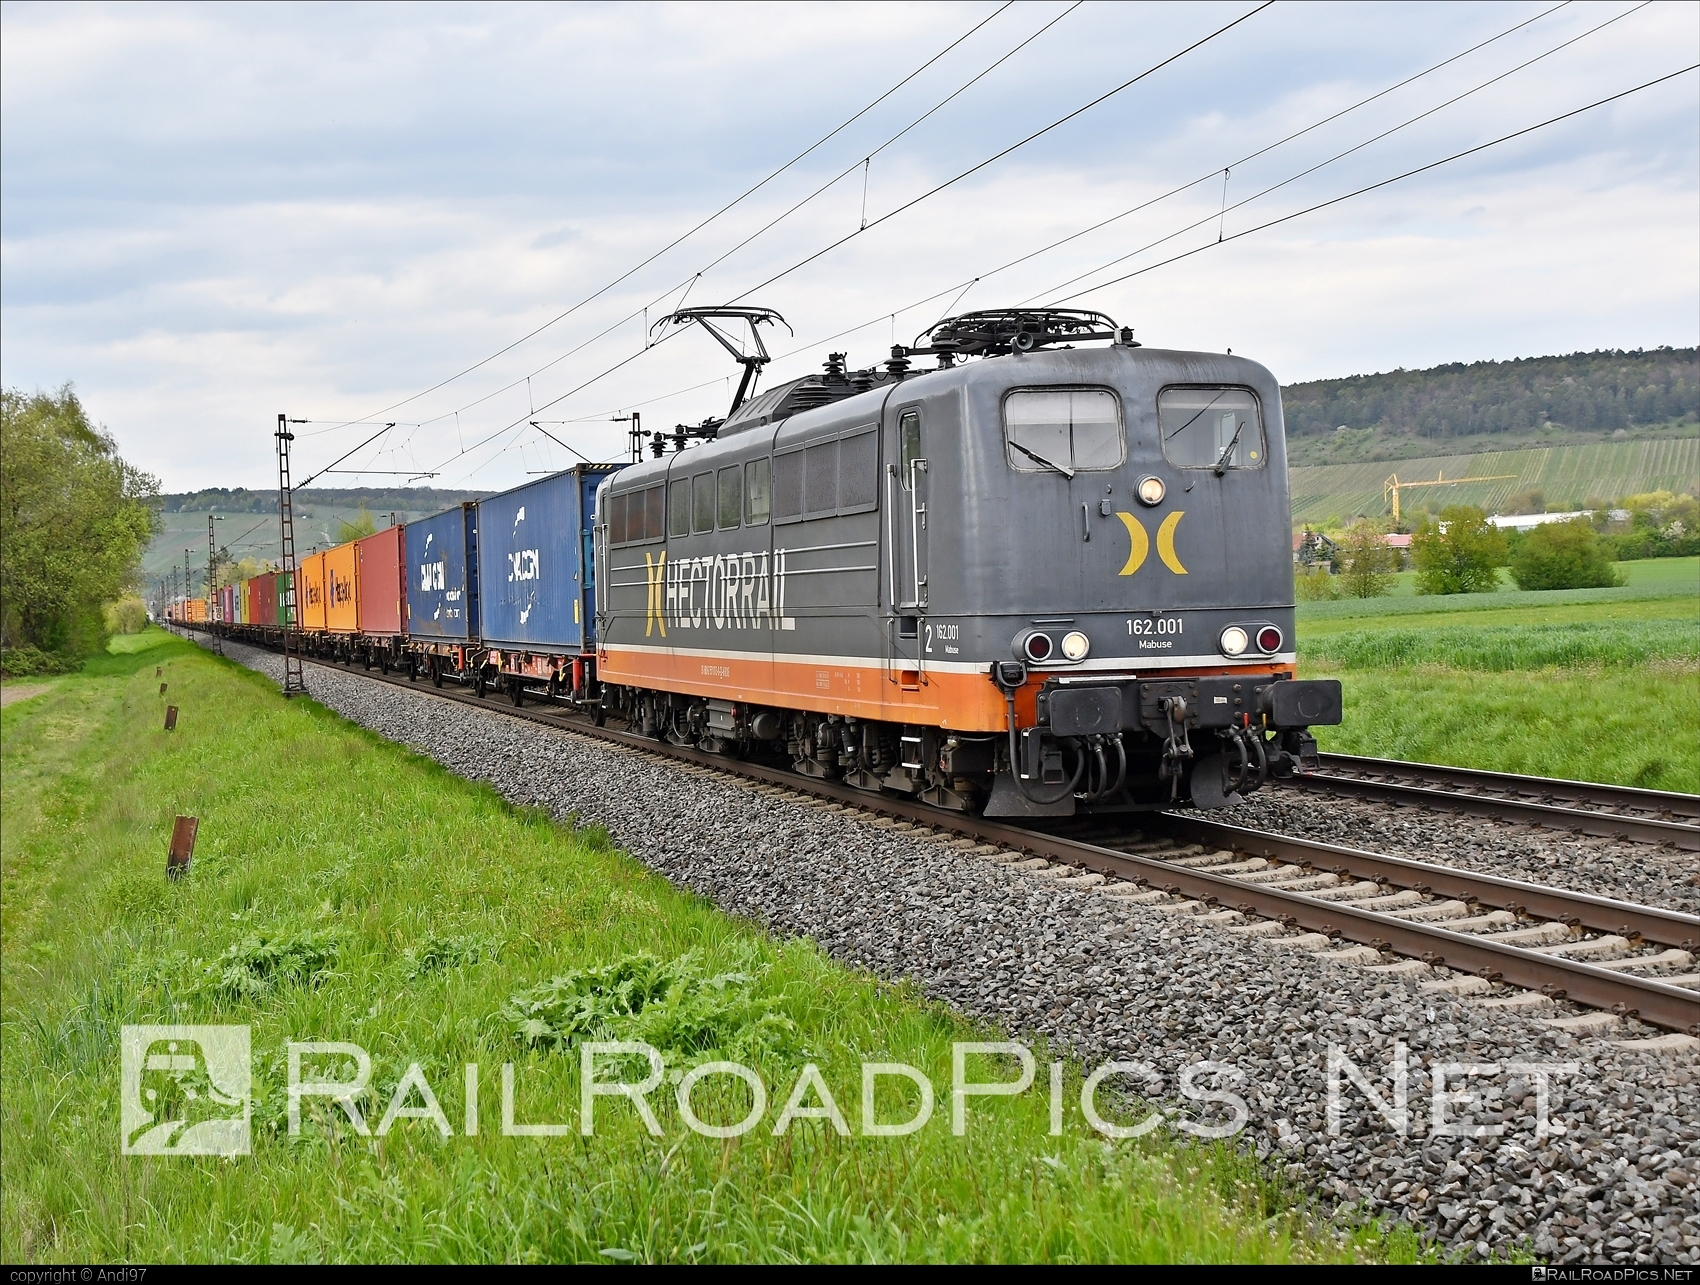 DB Class 151 - 162.001 operated by Hector Rail AB #container #dbClass151 #flatwagon #hector #hectorRail #hectorRailAB #hectorrail